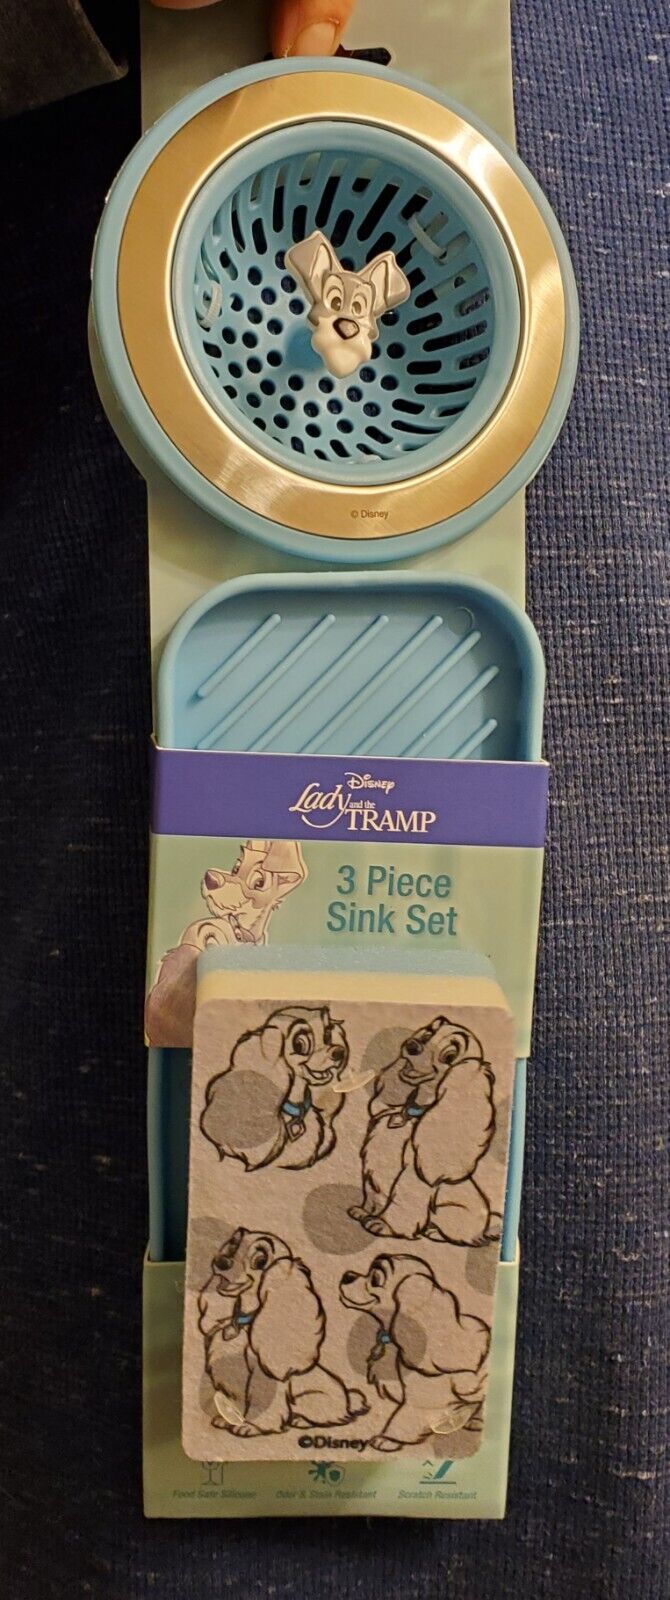 Disney Lady And The Tramp 3 Piece Sink Set